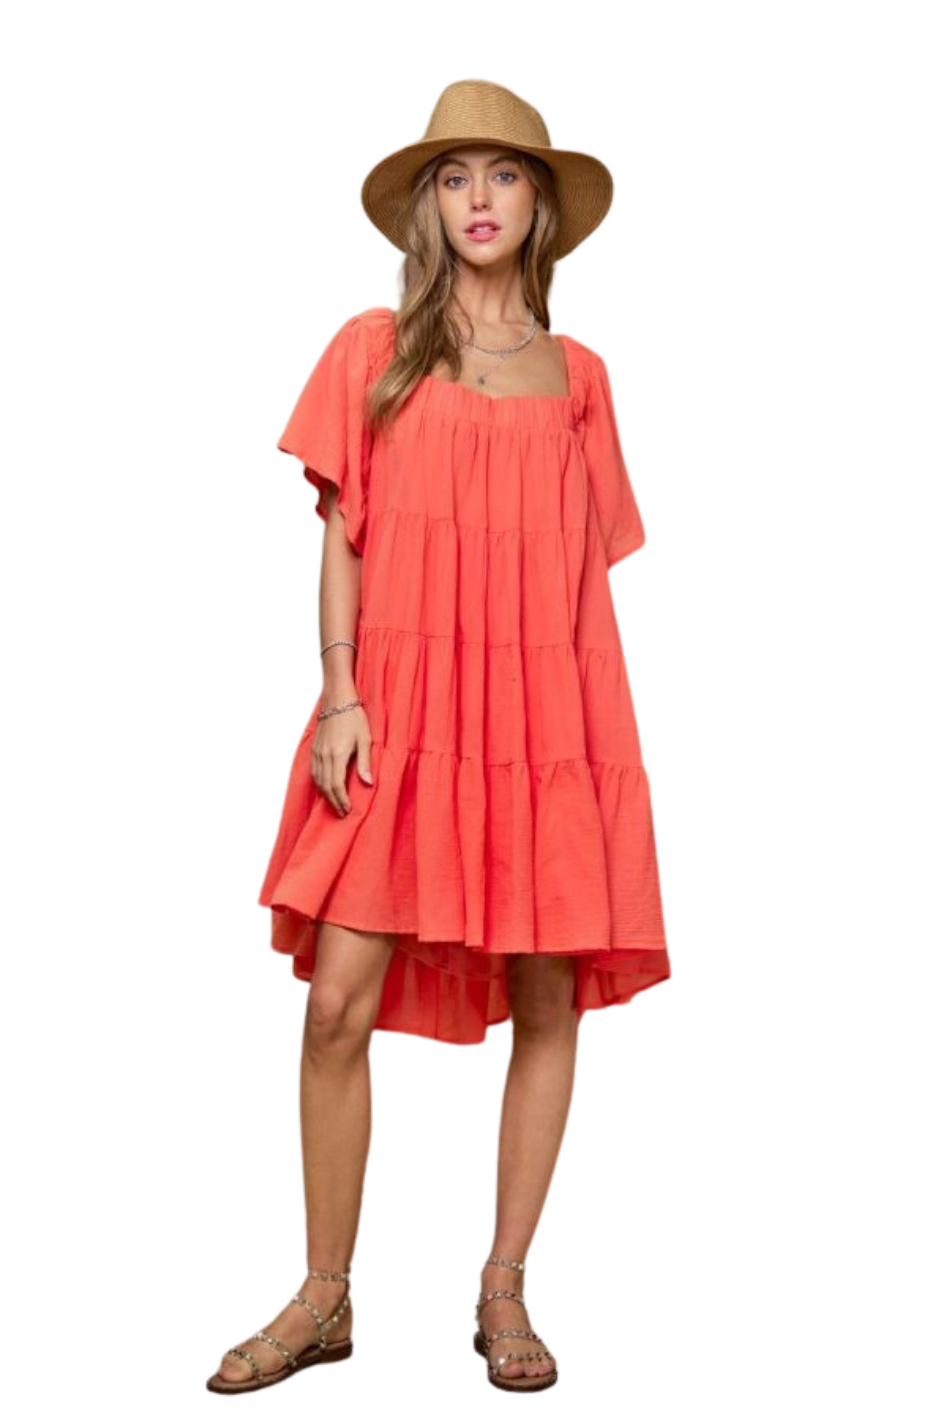 Coral Crush Babydoll Dress - Expressive Collective CO.